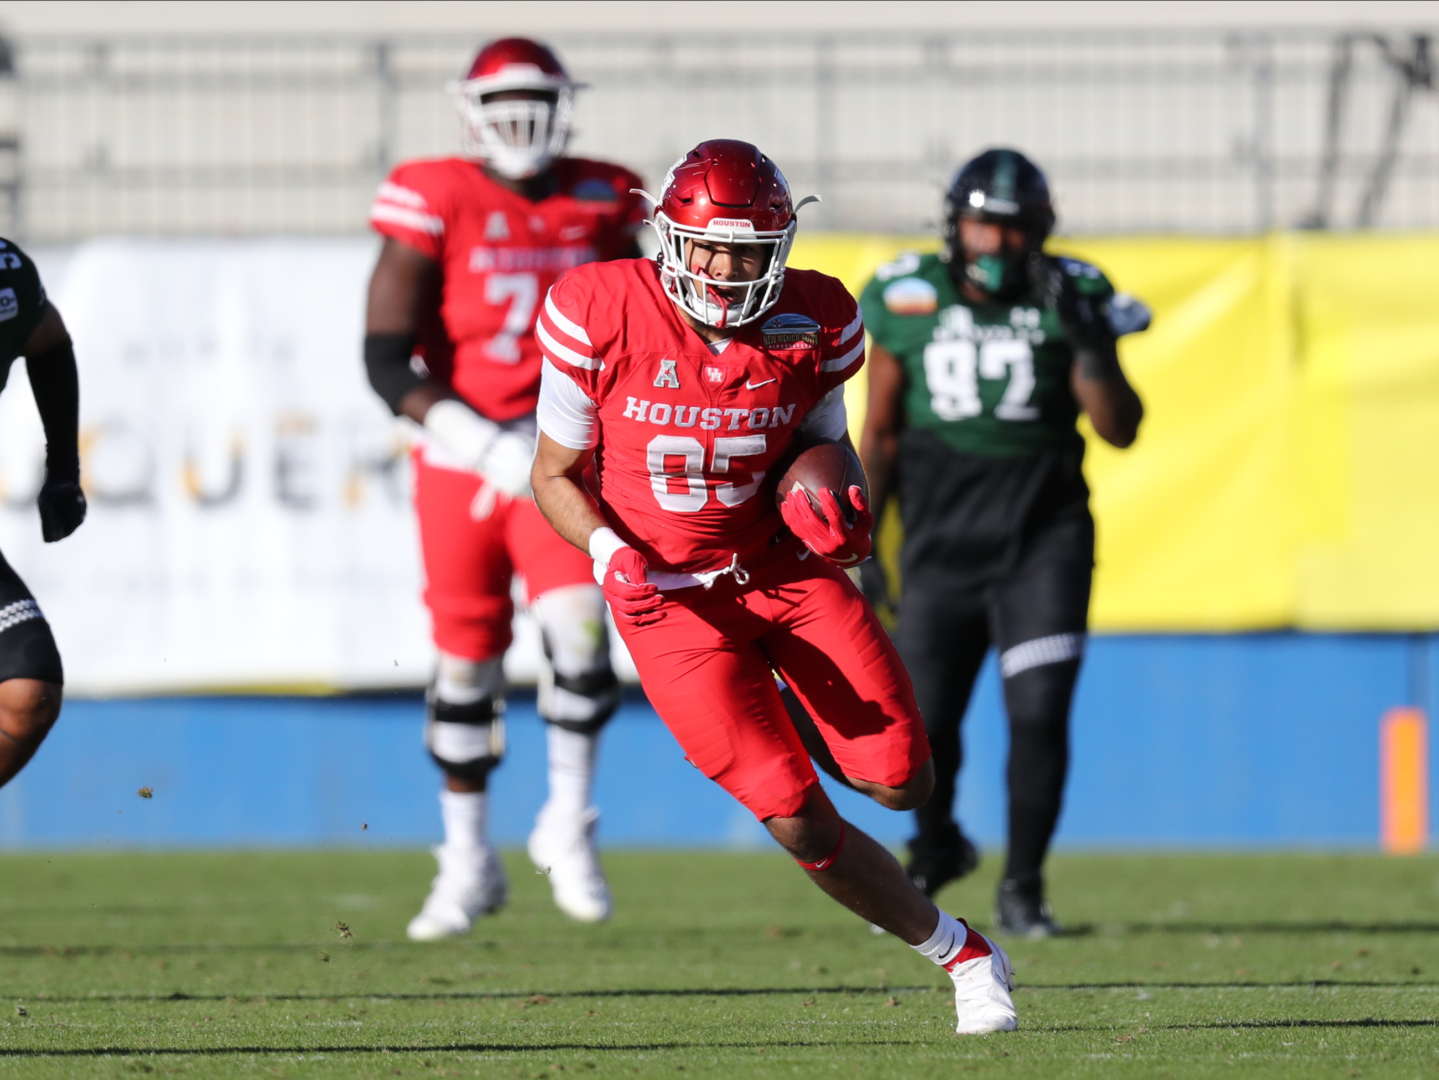 Junior tight end Christian Trahan had five catches for 88 yards and a touchdown in Houston's loss to Hawai’i in the 2020 New Mexico Bowl. | Courtesy of Vladimir Cherry